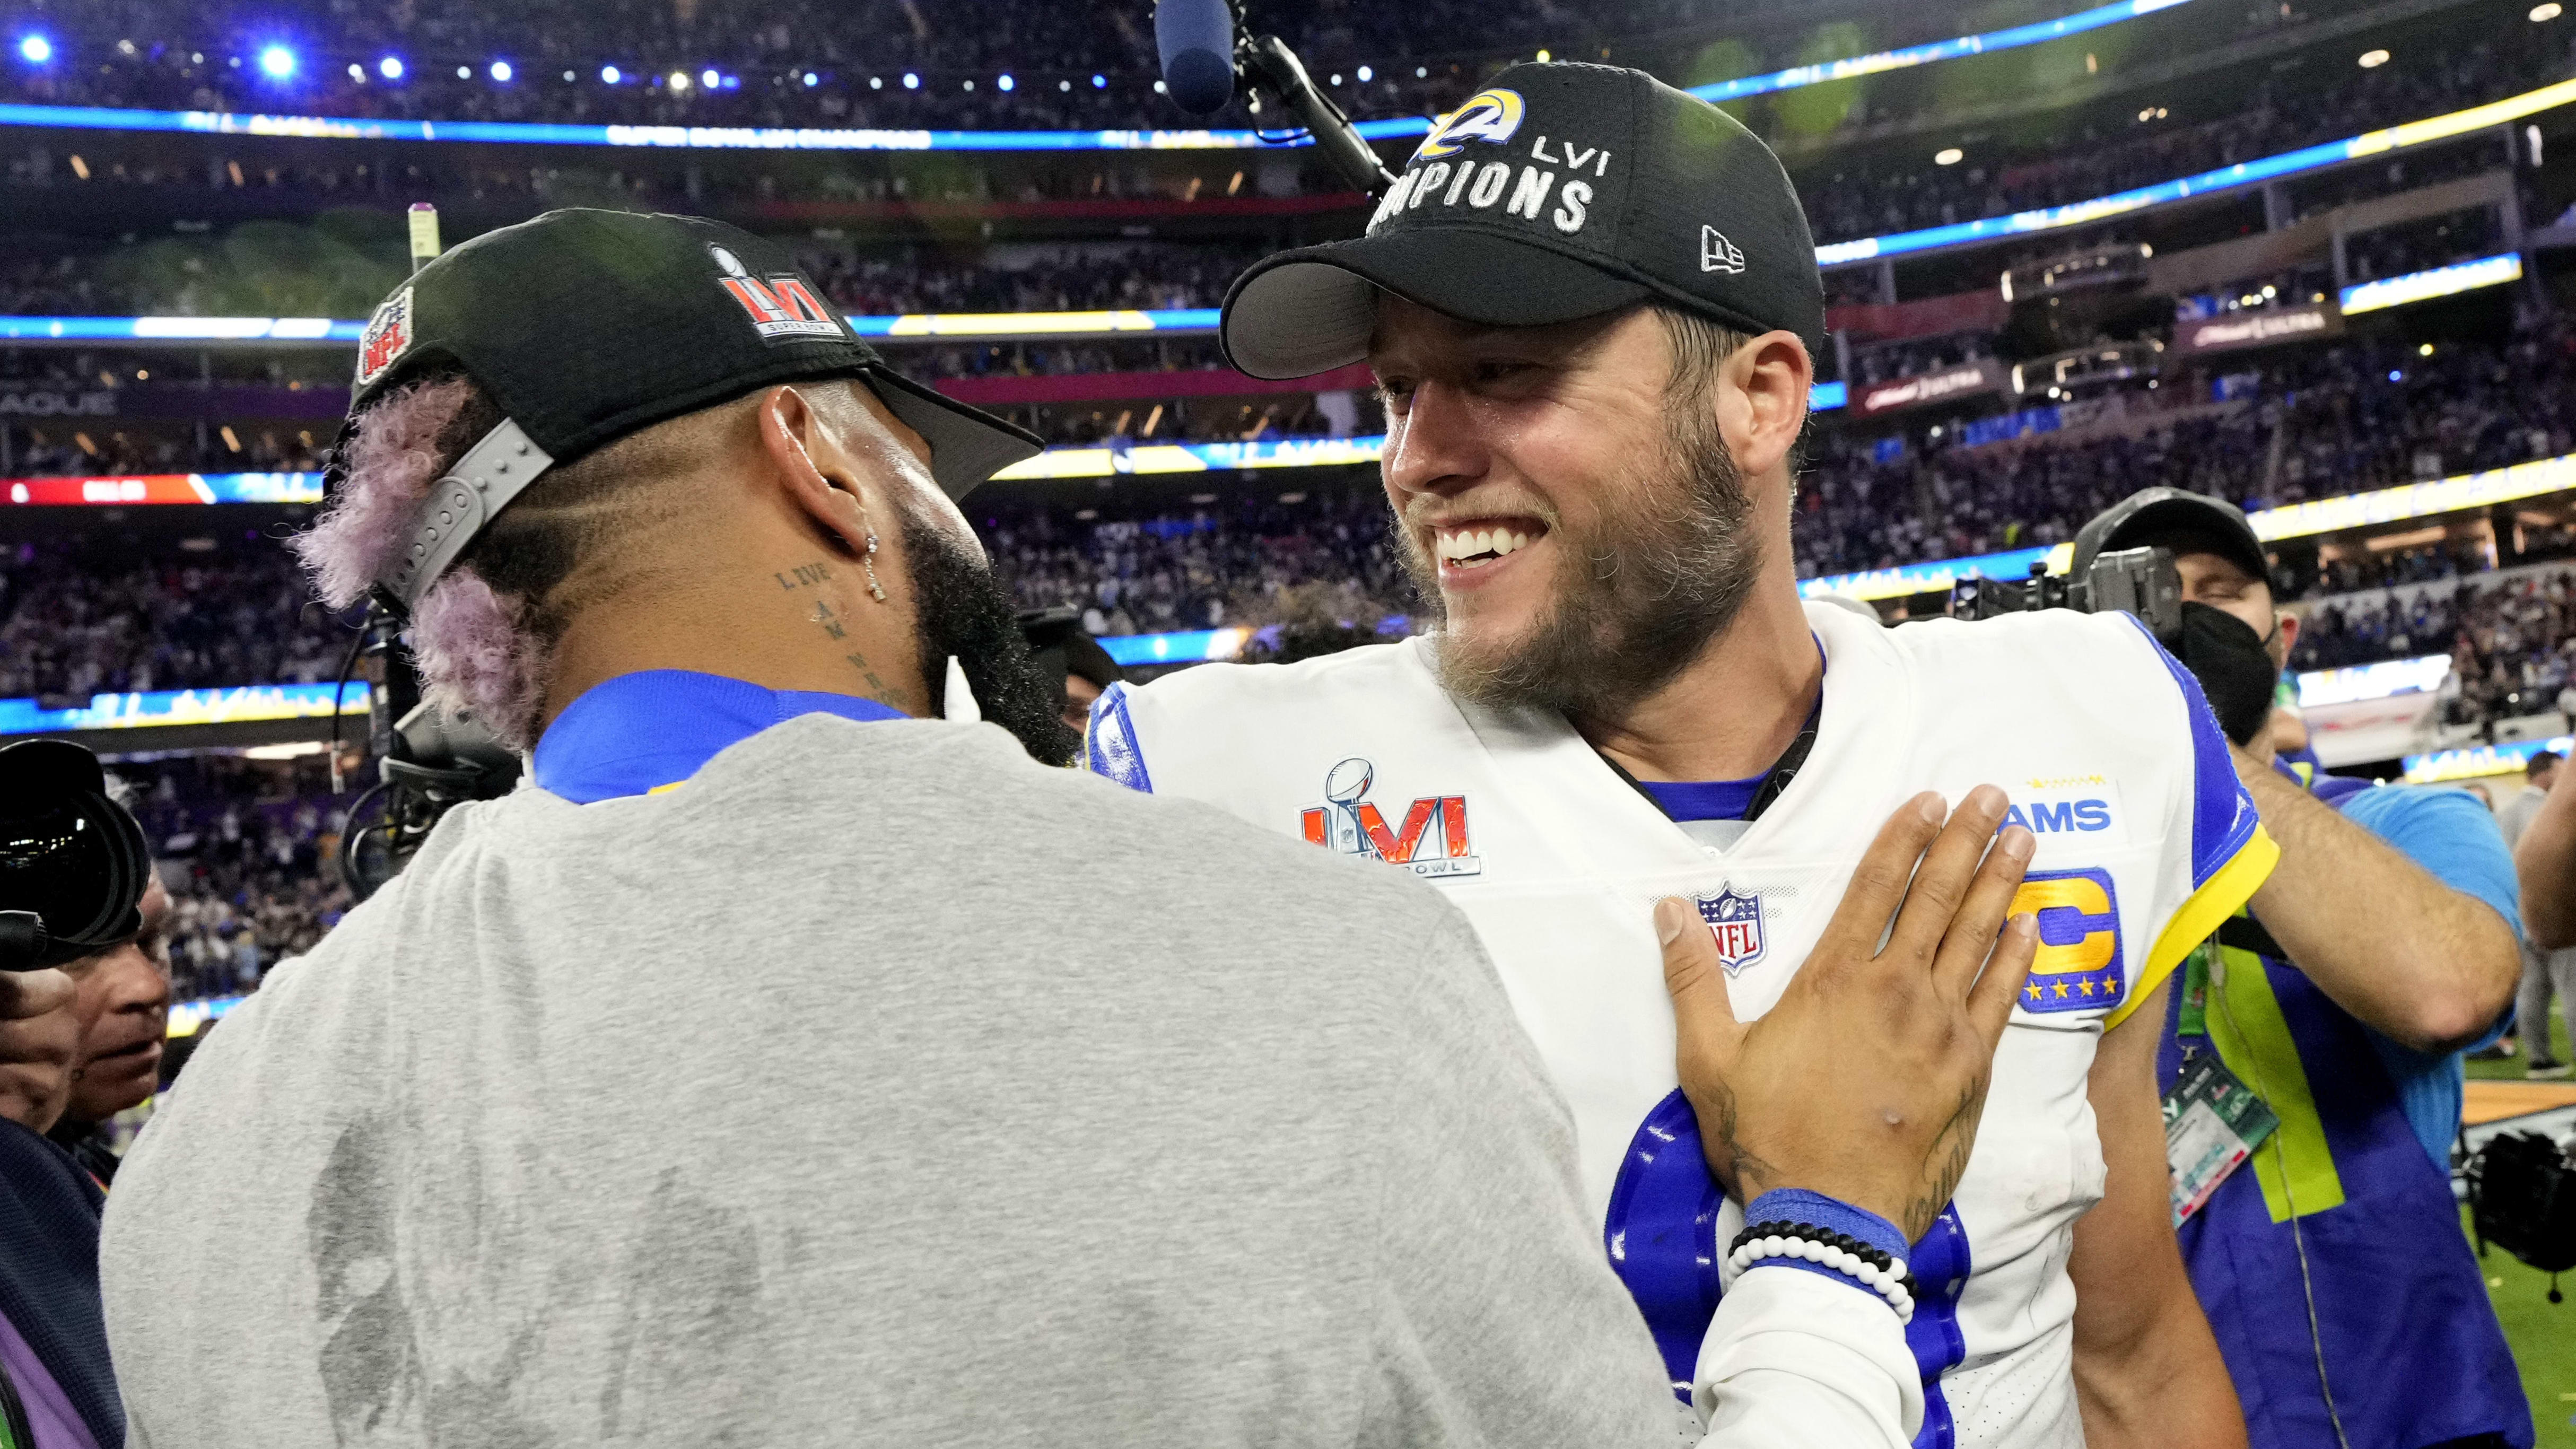 Stafford Turns Around After Photographer Fell During Super Bowl Parade